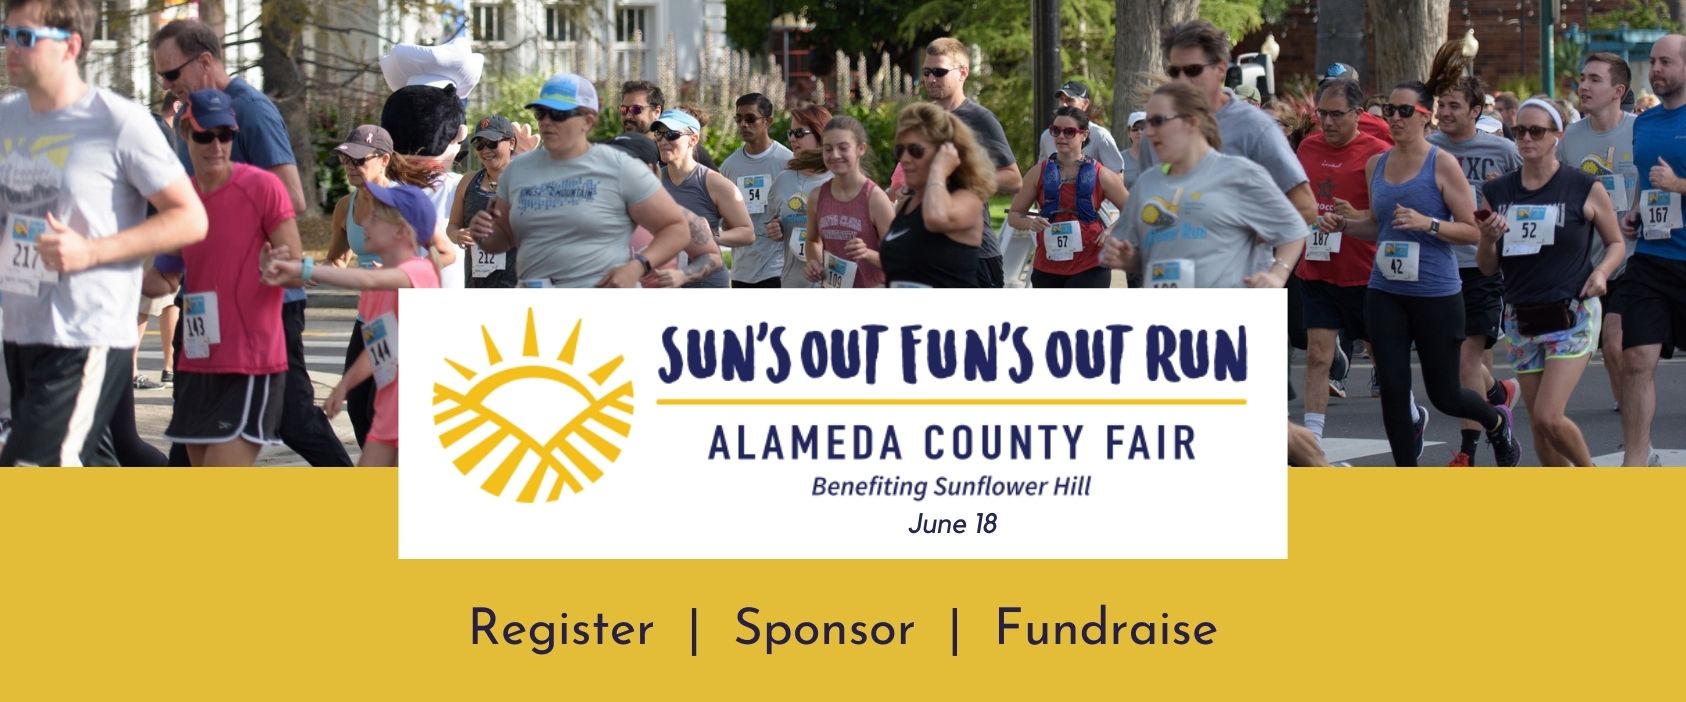 Alameda County Fair Sun's Out Fun's Out fun run on June 18, benefiting Sunflower Hill. Image of runners.